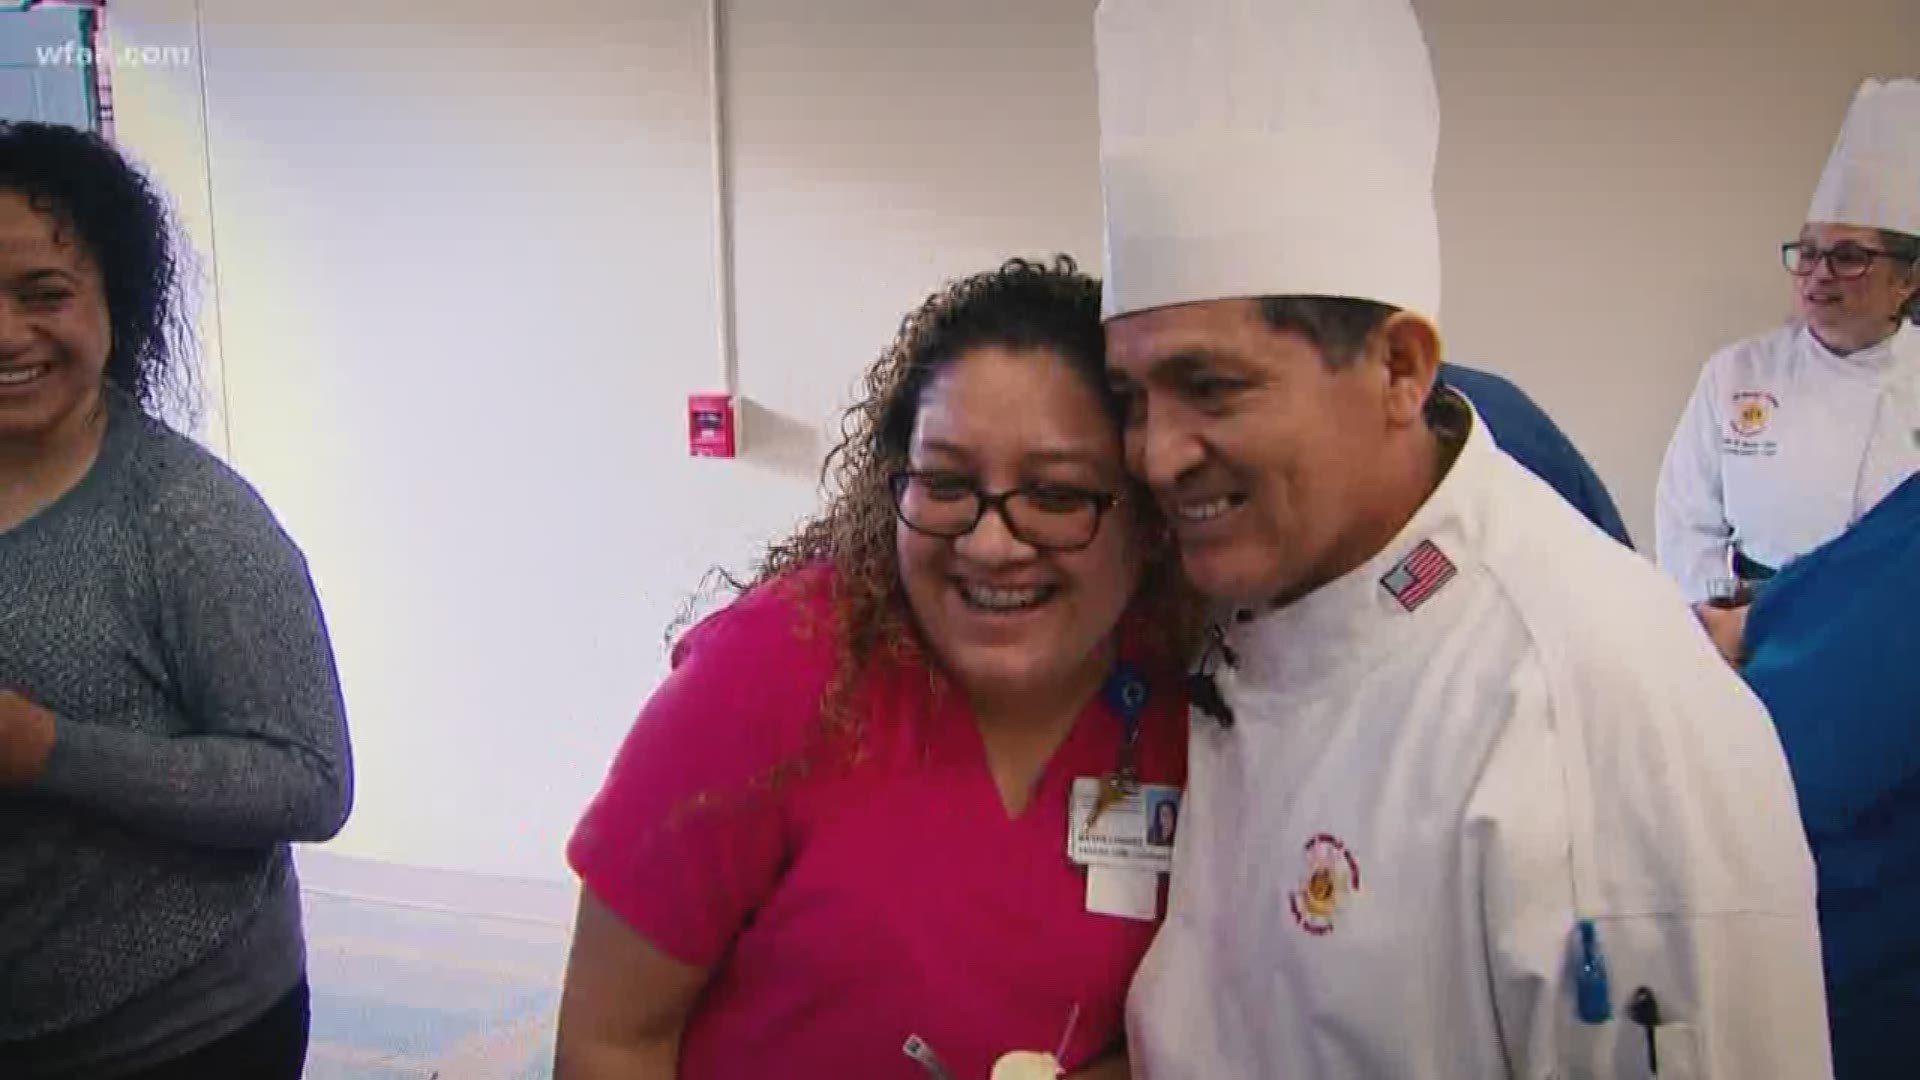 "It was a lot to do with being tired. I was very, very tired." For Mario Reyes, a professional chef, it was more than just being tired. The culprit behind his gaunt face was liver disease. He needed a transplant, or he would die.